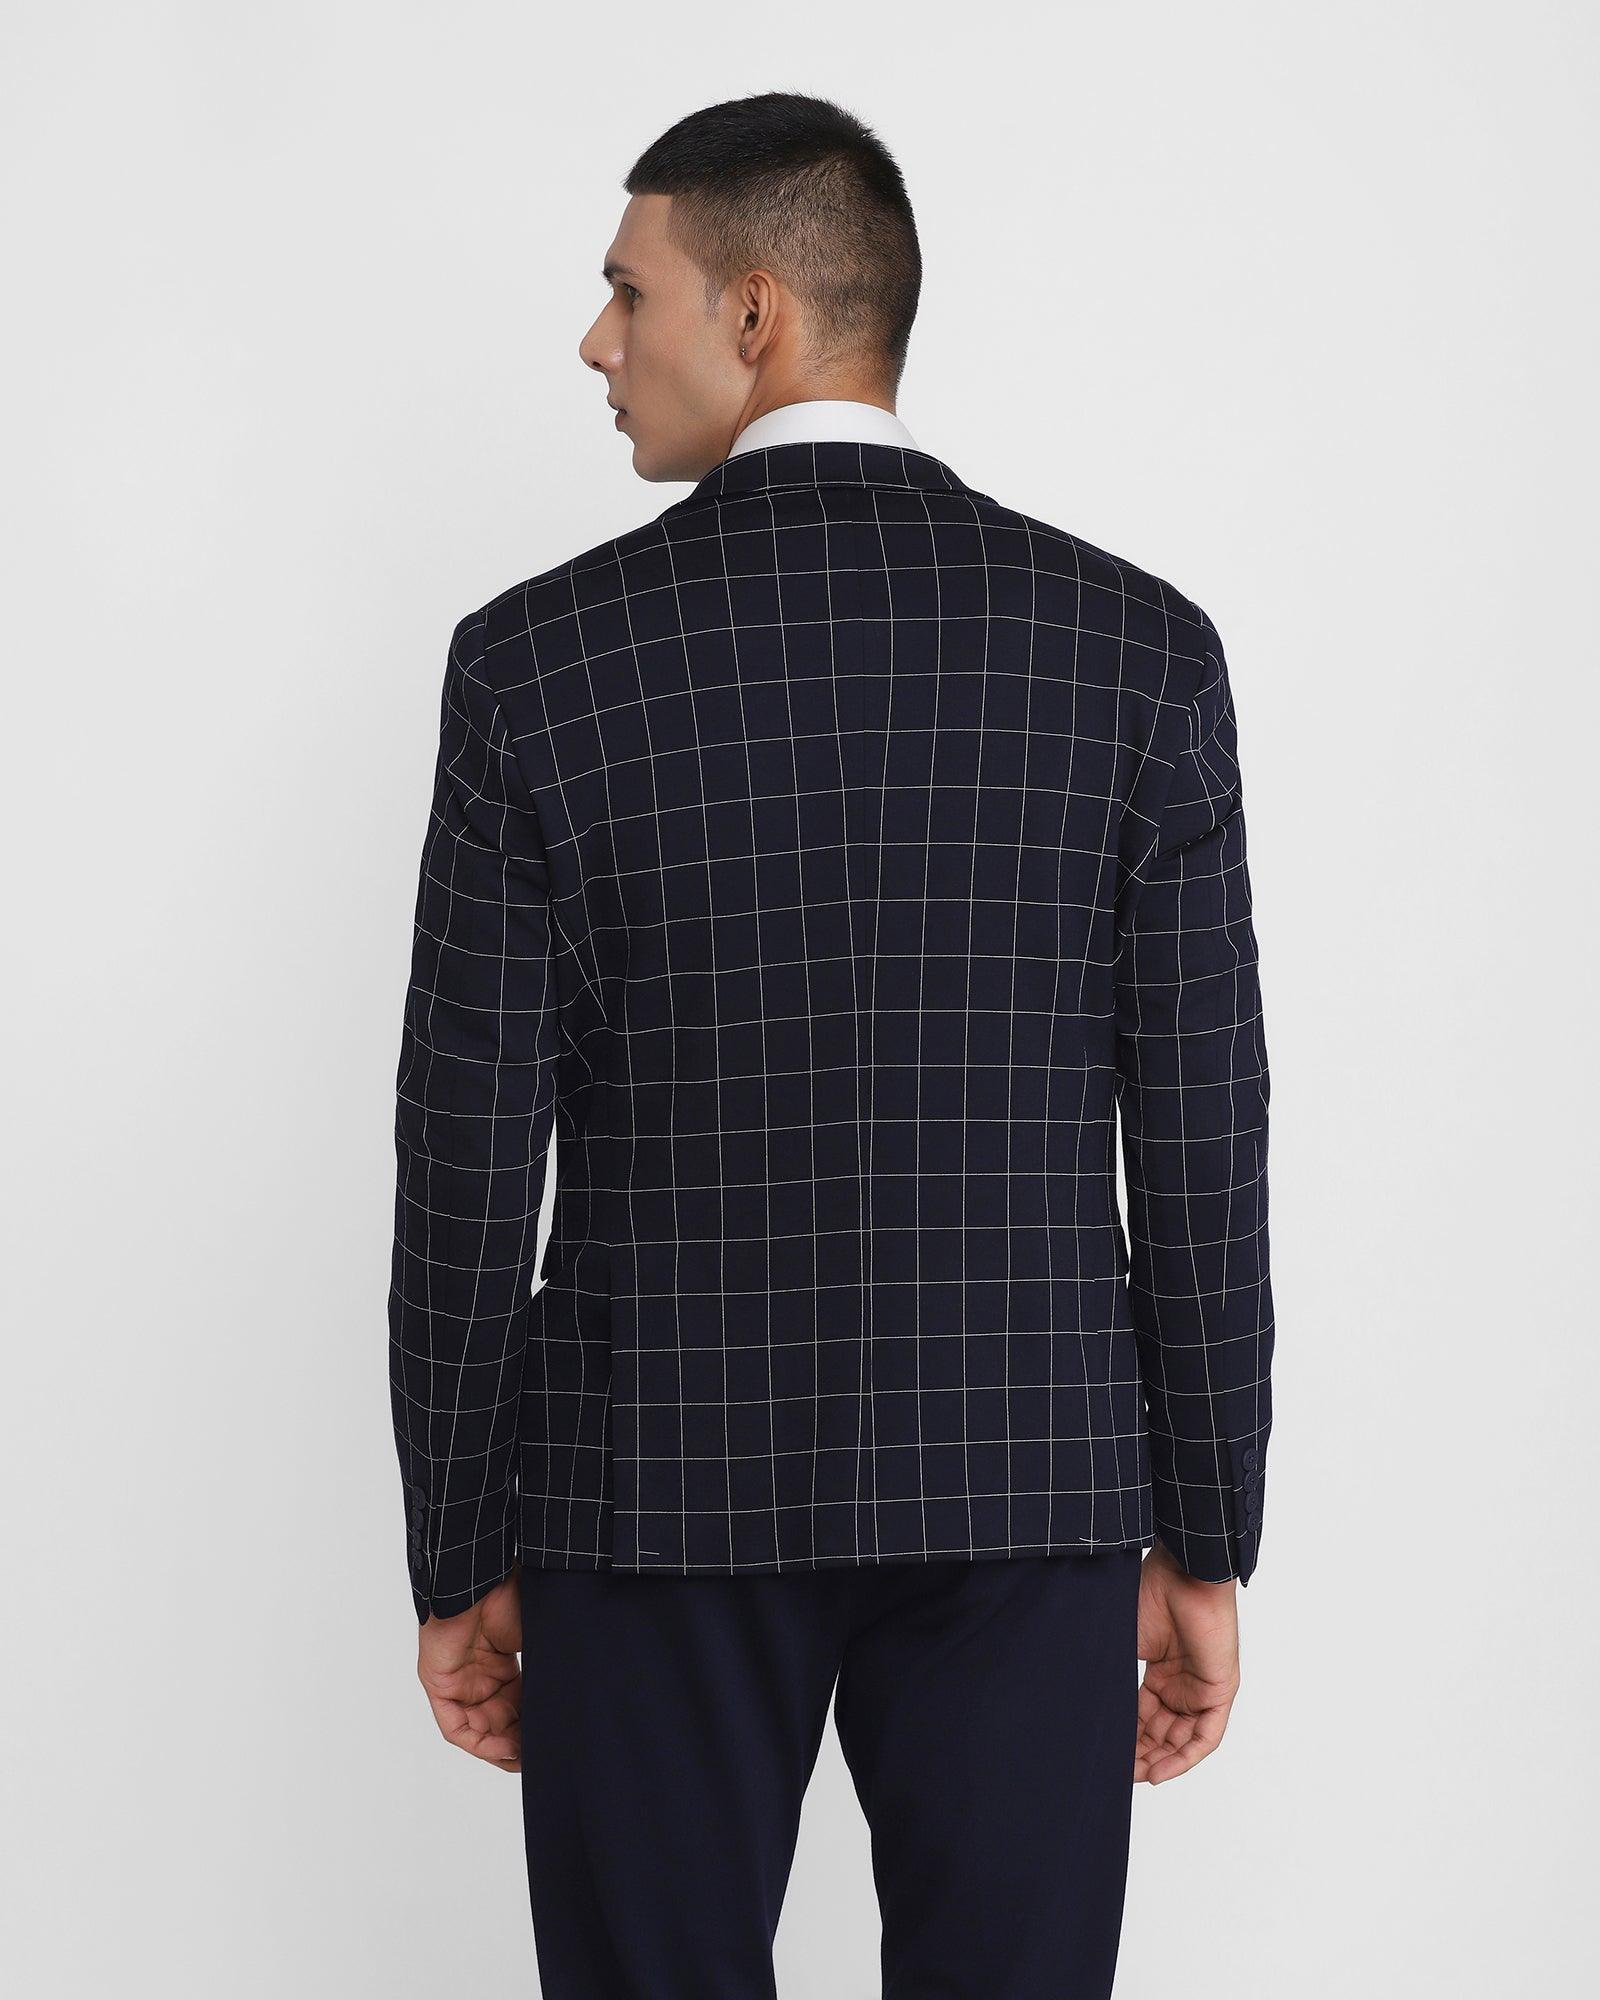 TechPro Two Piece Navy Check Formal Suit - Techton